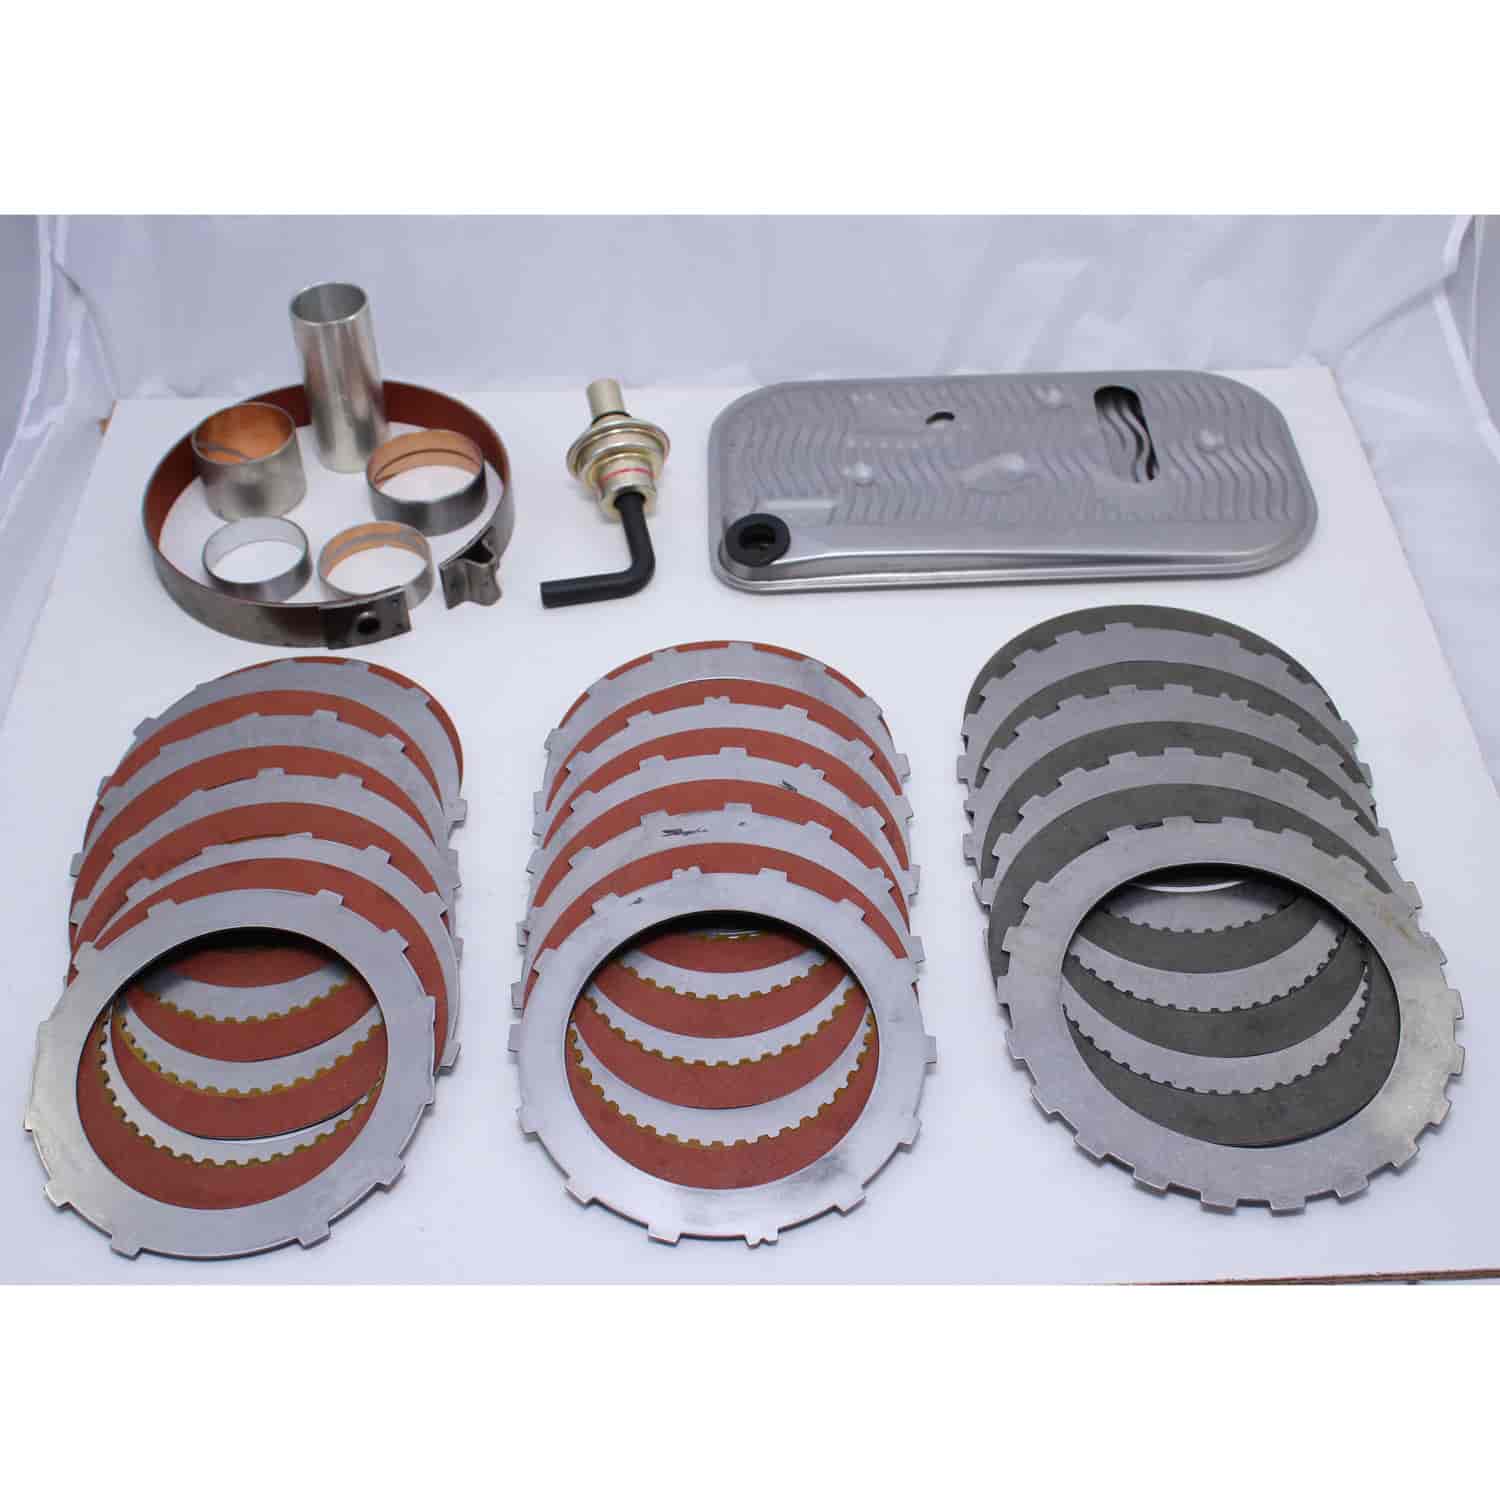 4 CLUTCH INTERMEDIATE PACK NEW HIGH PERFORMANCE STEEL PLATES RED RACE FRICTION PLATES ALL SEALS GASK